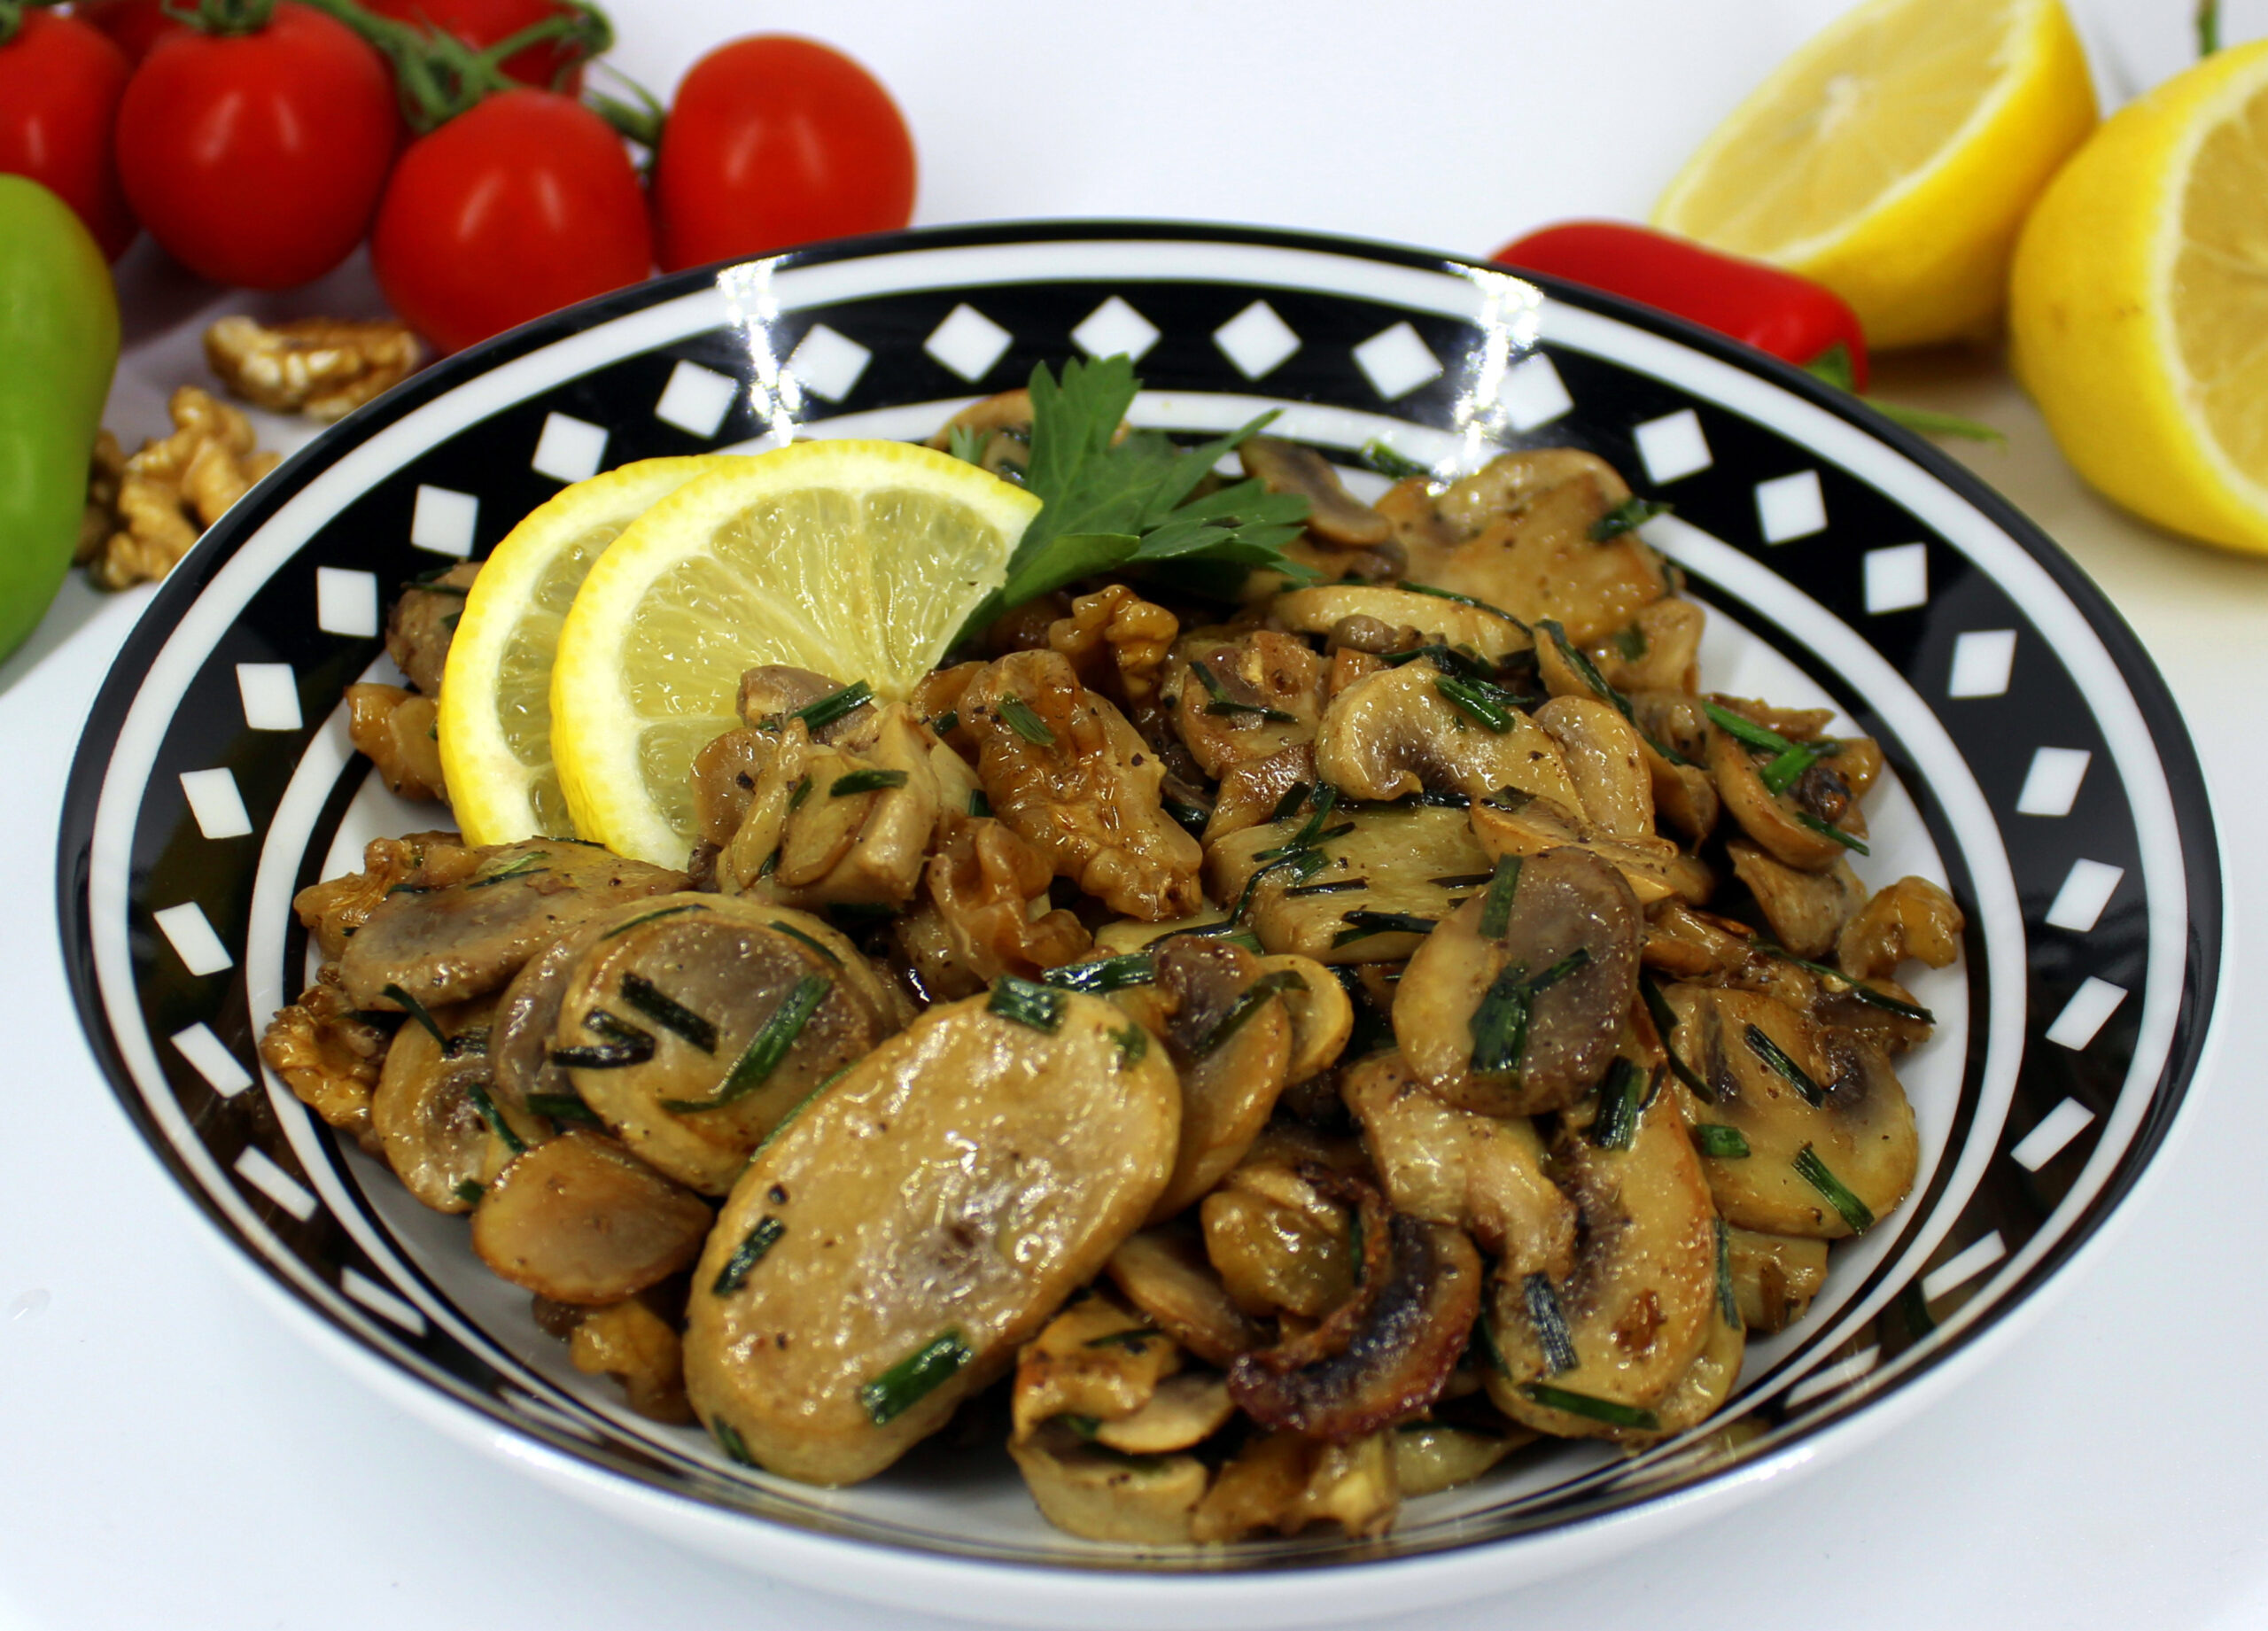 Plate of mushrooms with lemon and walnuts